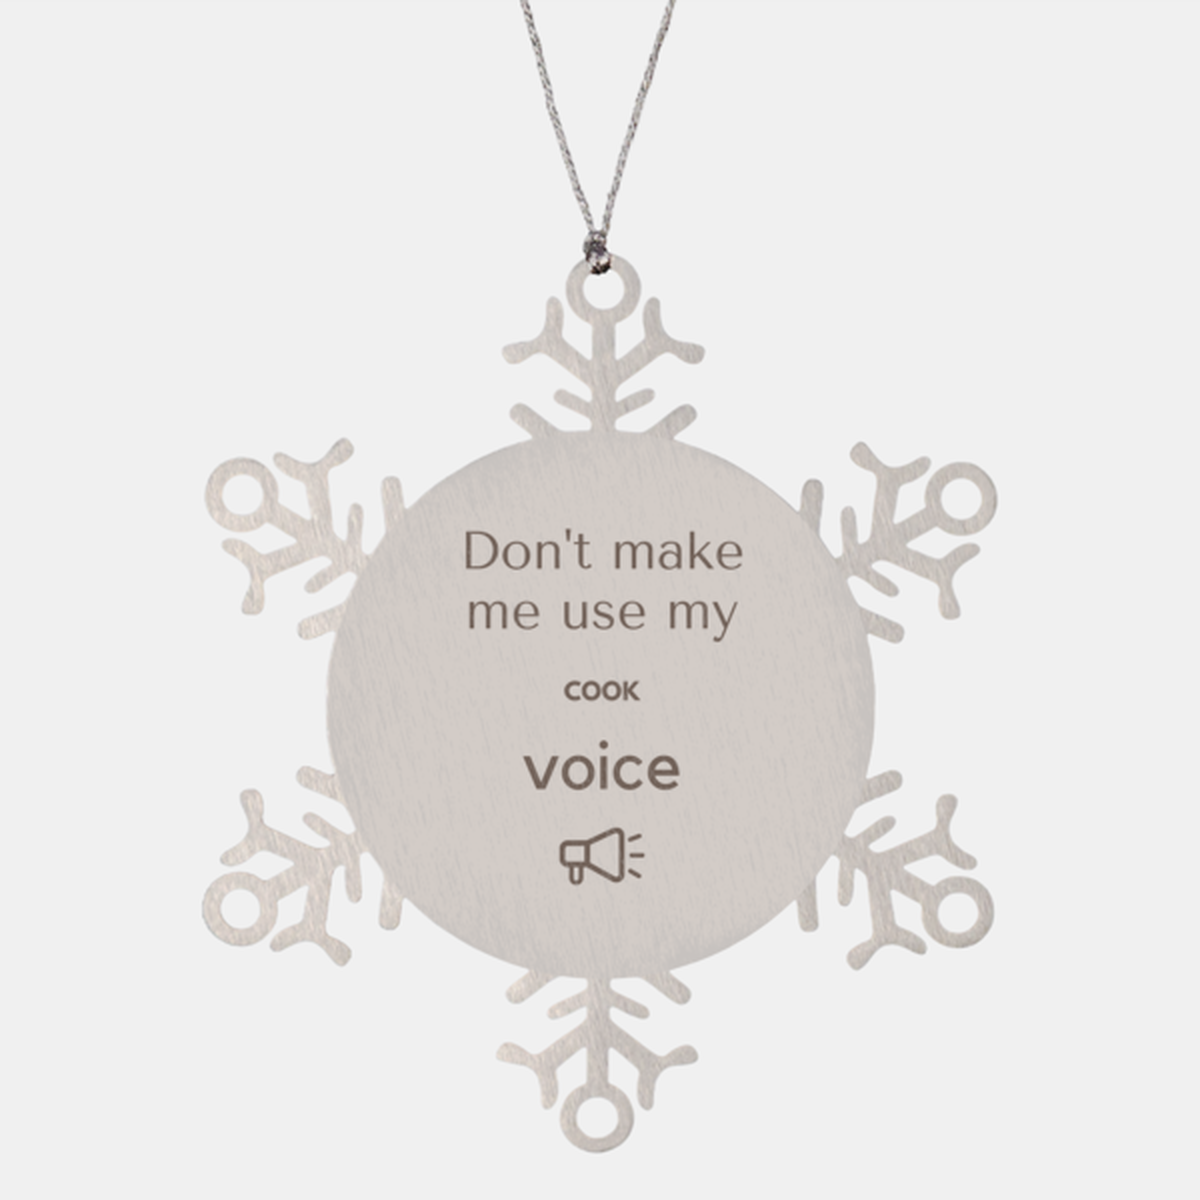 Don't make me use my Cook voice, Sarcasm Cook Ornament Gifts, Christmas Cook Snowflake Ornament Unique Gifts For Cook Coworkers, Men, Women, Colleague, Friends